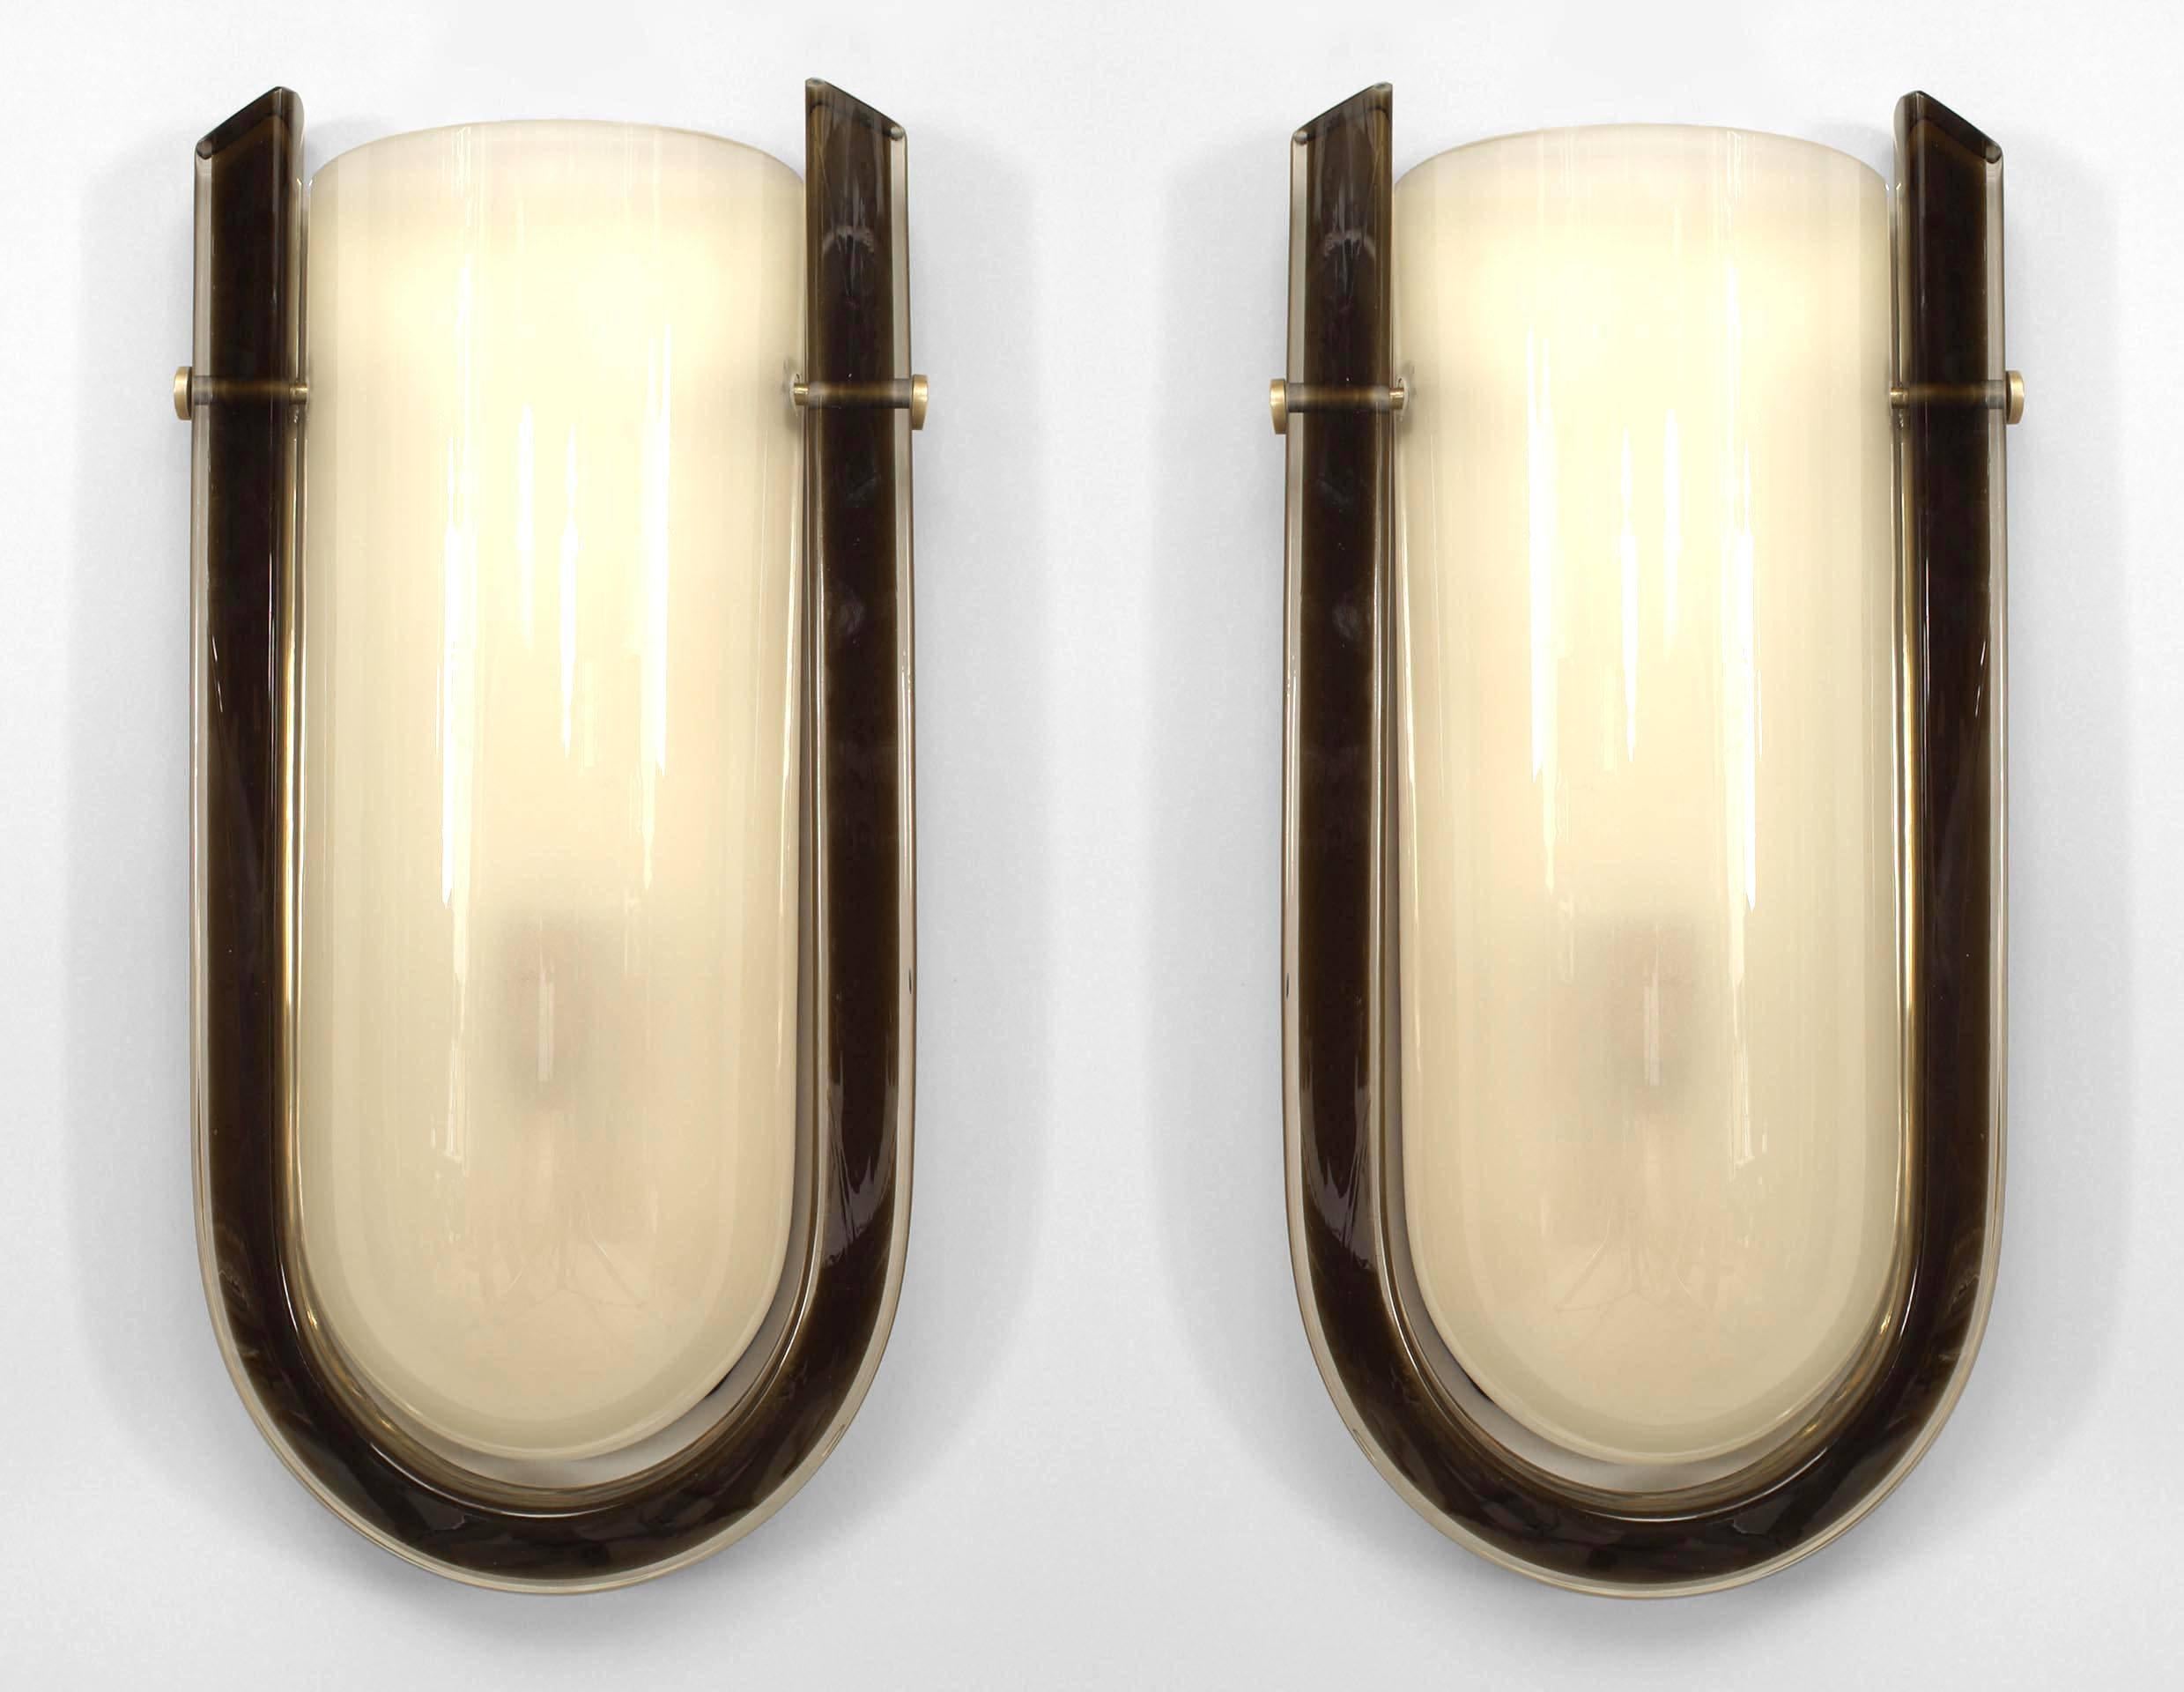 Pair of Italian Murano glass wall sconce with oval form frosted white shade within a 